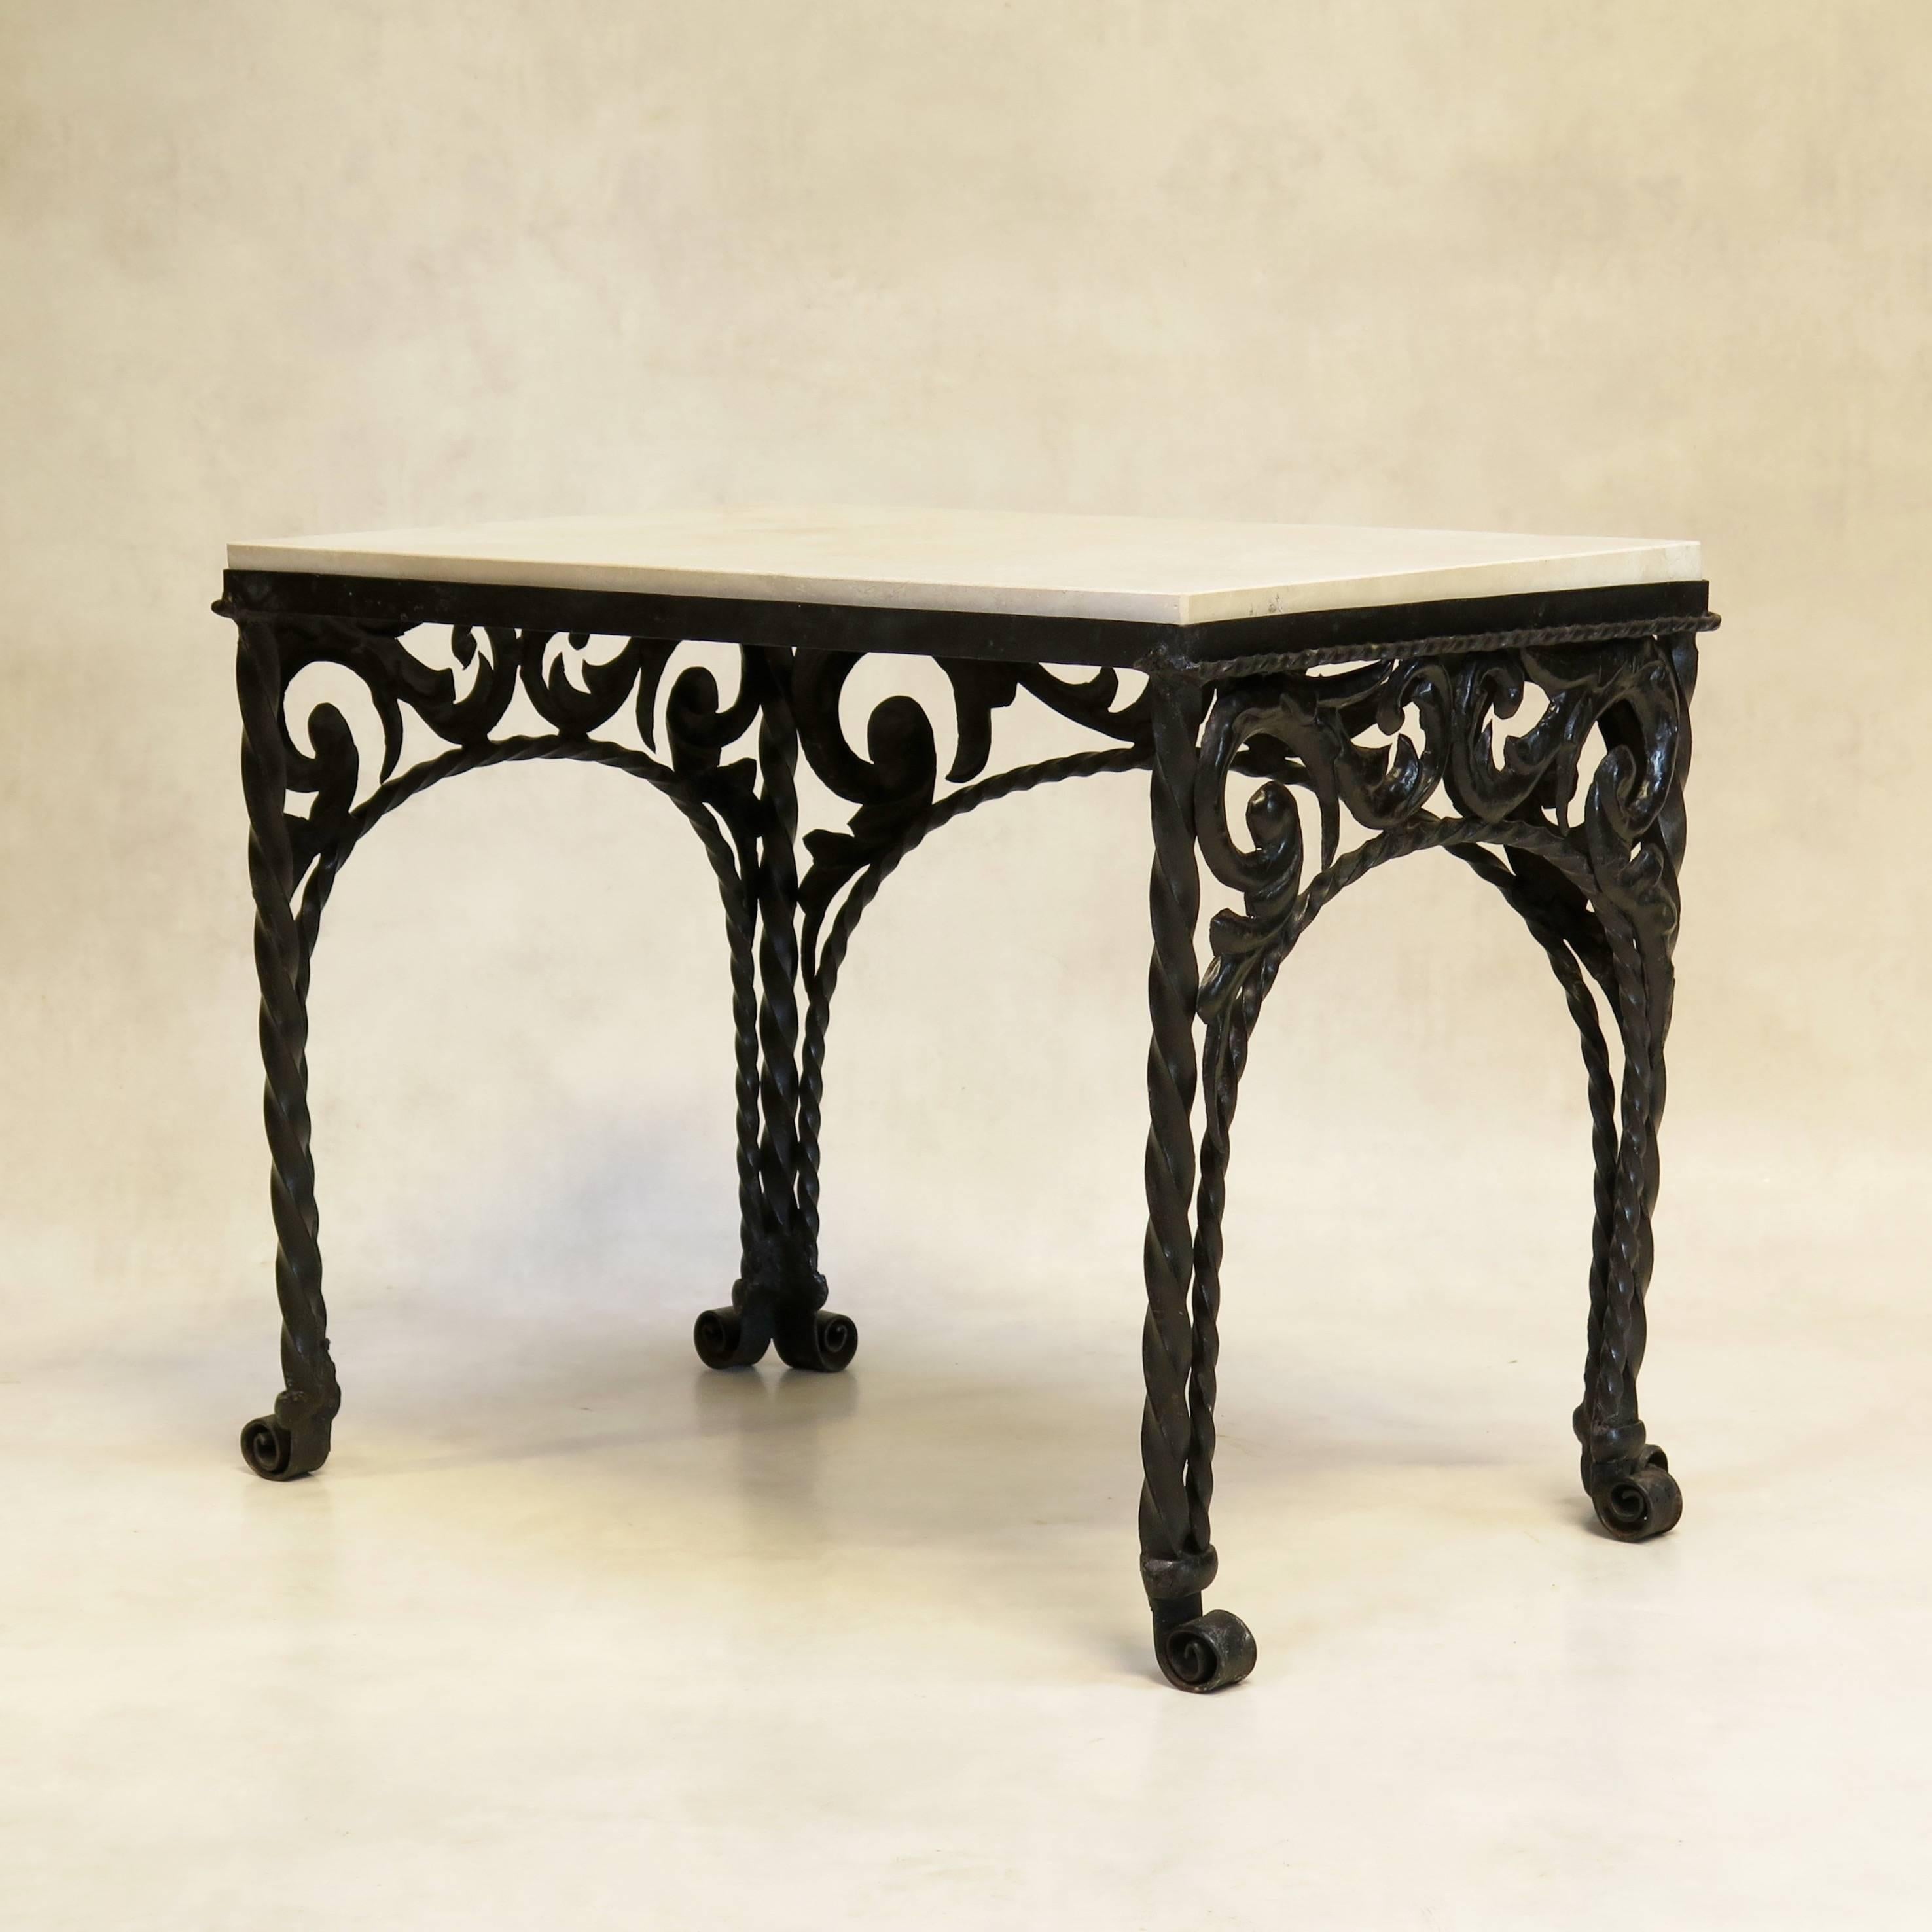 20th Century Pair of Ornate Iron and Travertine Side Tables, Spain, circa 1920s For Sale